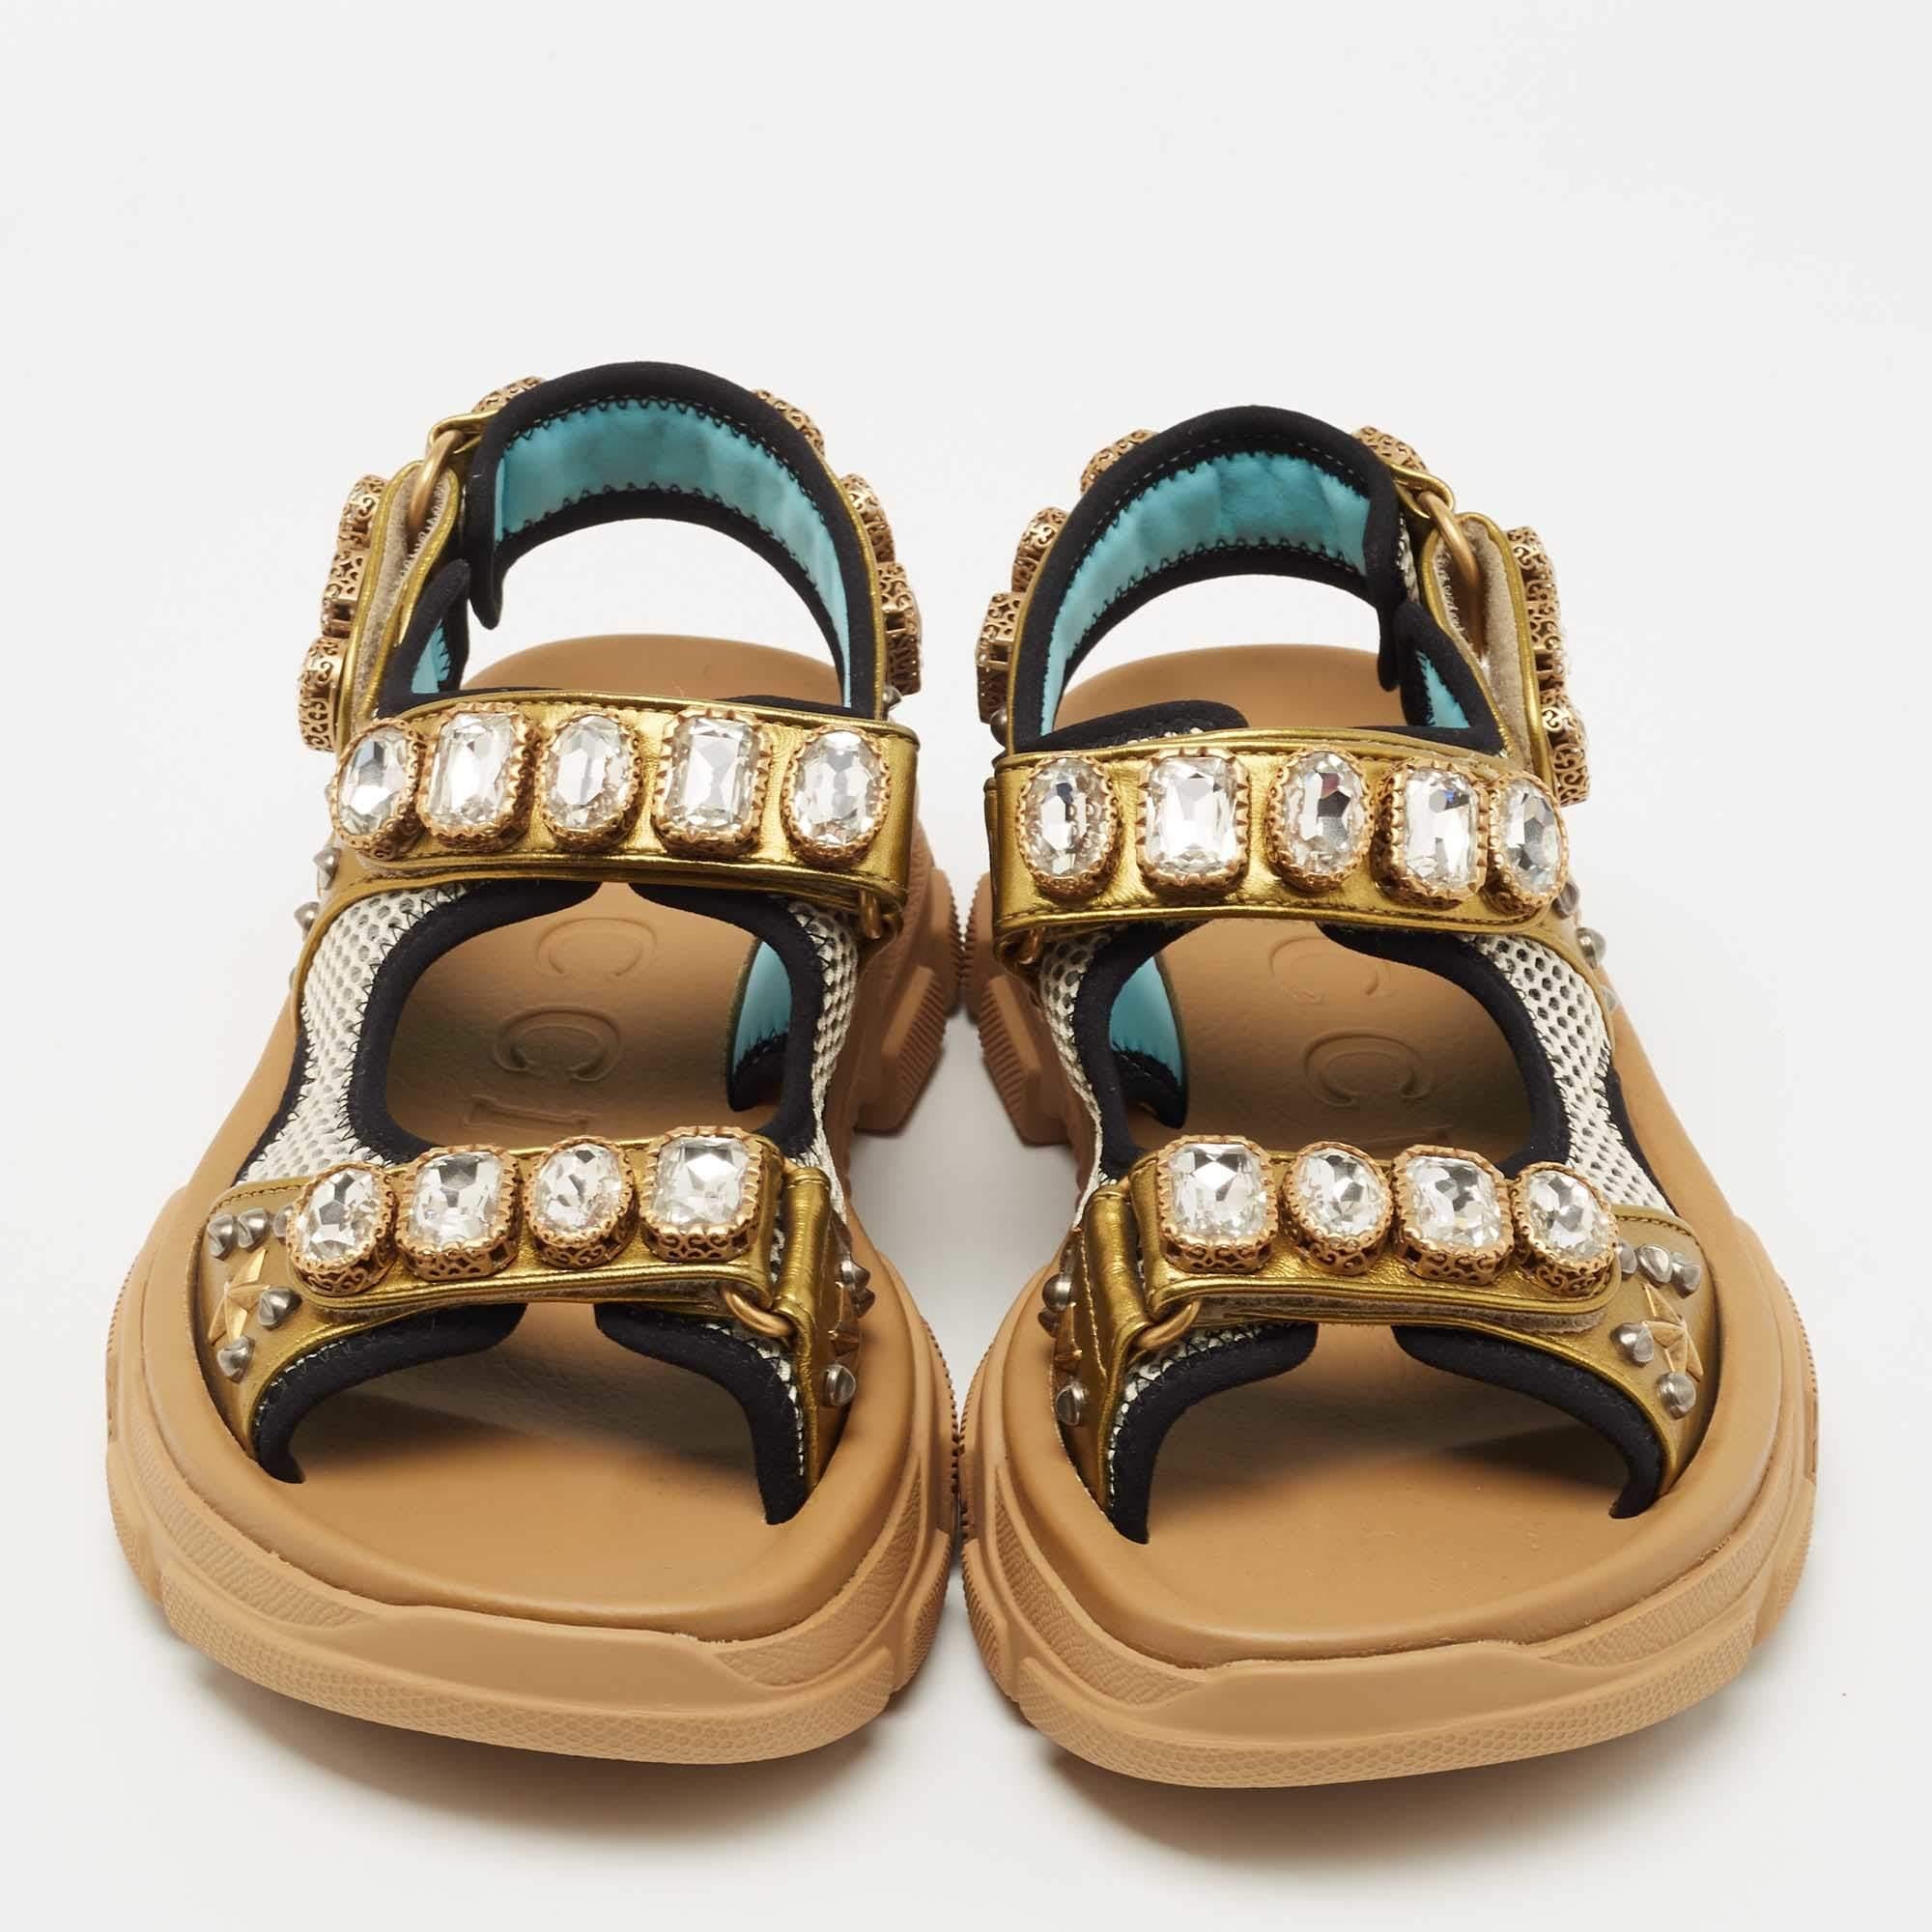 These stylish Gucci Aguru sandals are a perfect blend of comfort and style. Featuring a sturdy exterior made from leather and mesh, these sandals are accented with embellishments all over.
 
Includes: Dustbag
